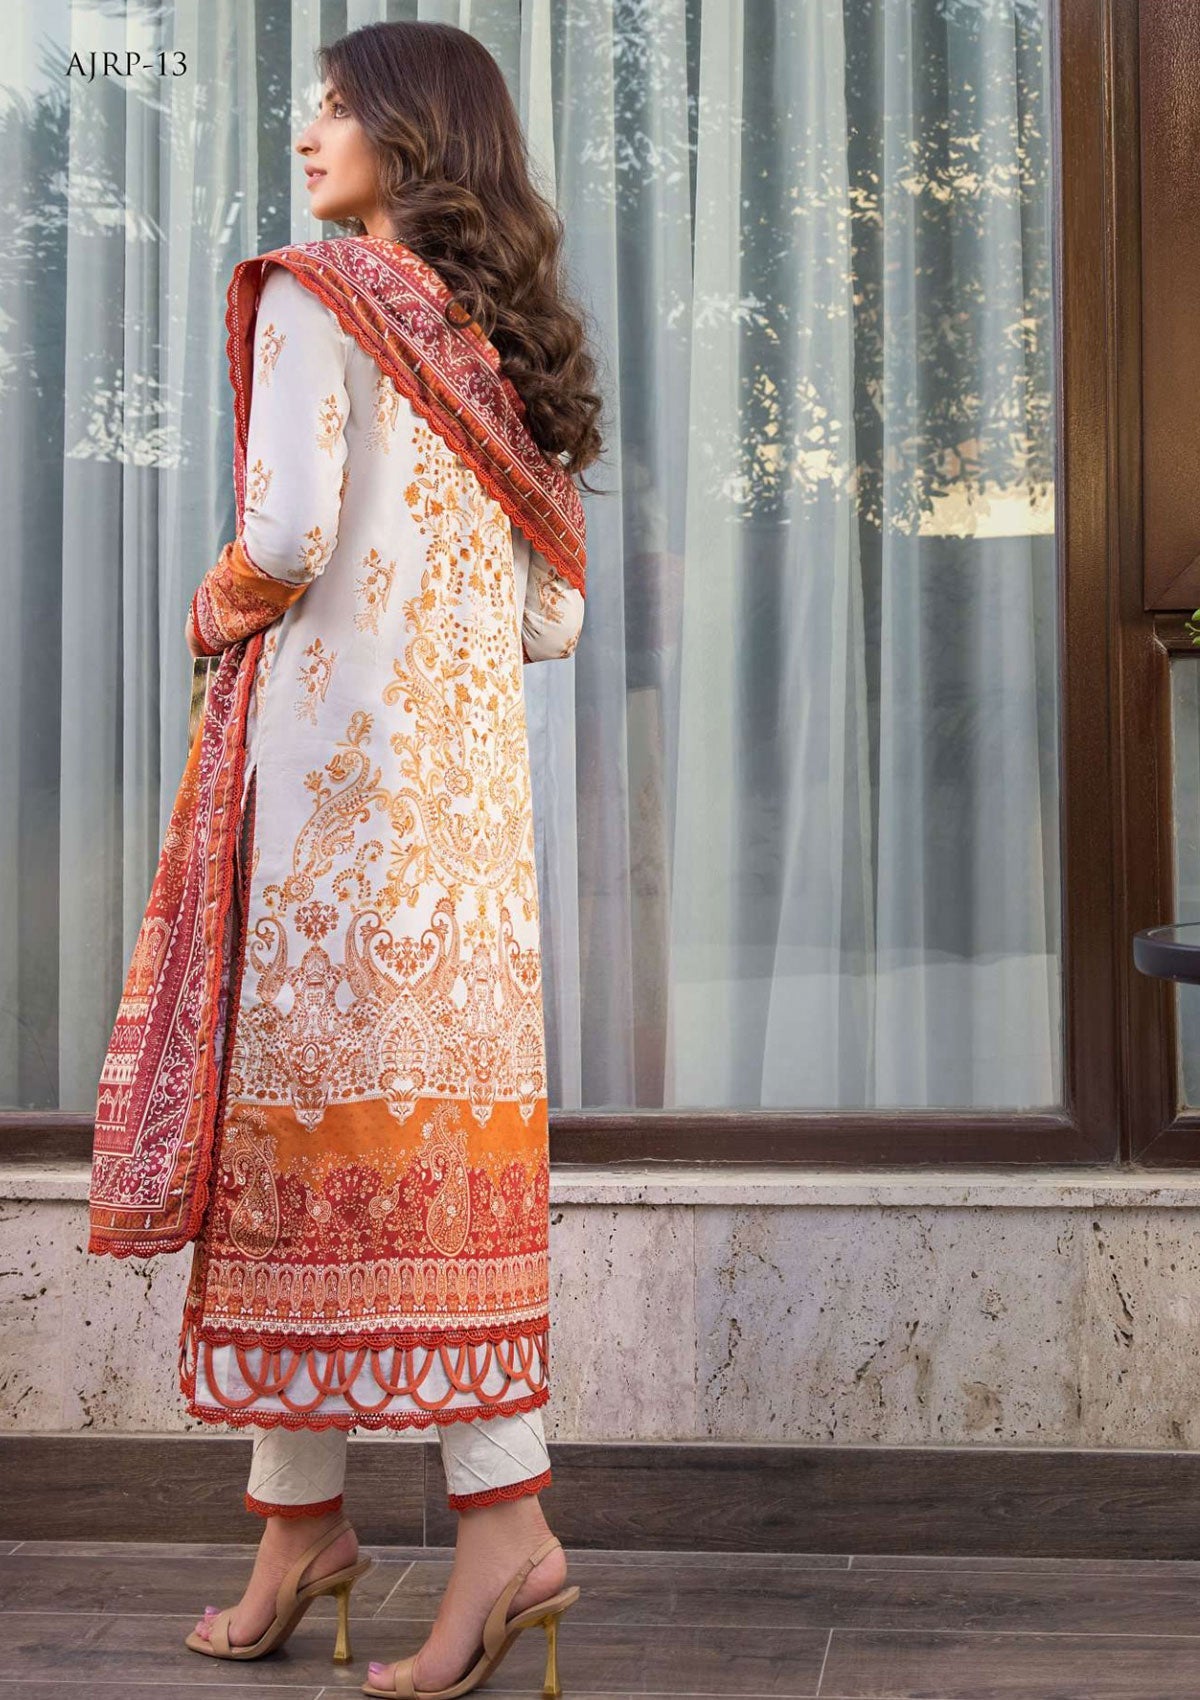 Lawn Collection - Asim Jofa - Rania - AJRP#13 available at Saleem Fabrics Traditions